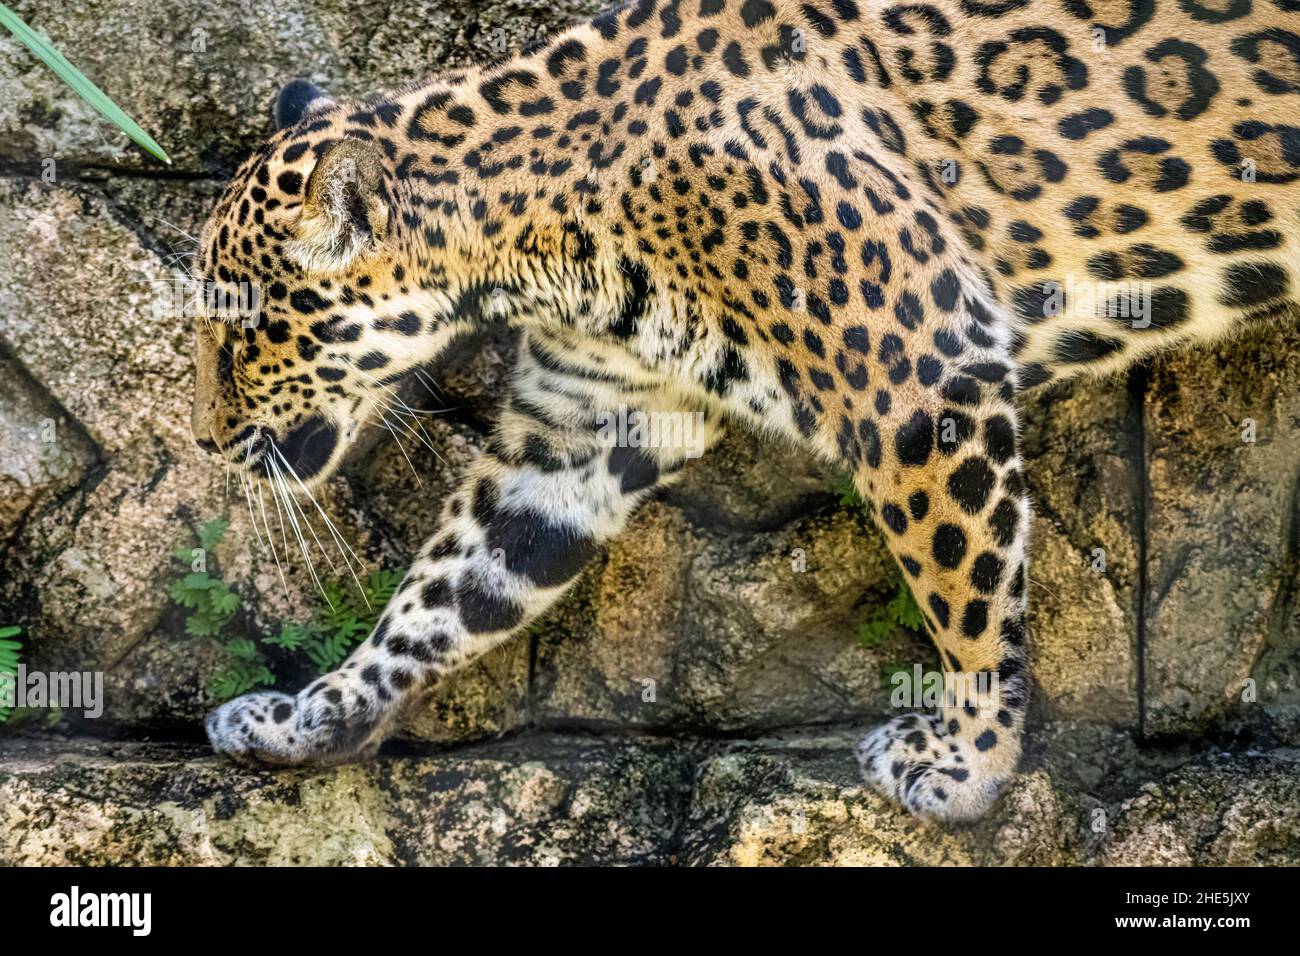 Majestic jaguar (Panthera onca), a beautiful apex predator from the Americas, at the Jacksonville Zoo and Gardens in Jacksonville, Florida. (USA) Stock Photo